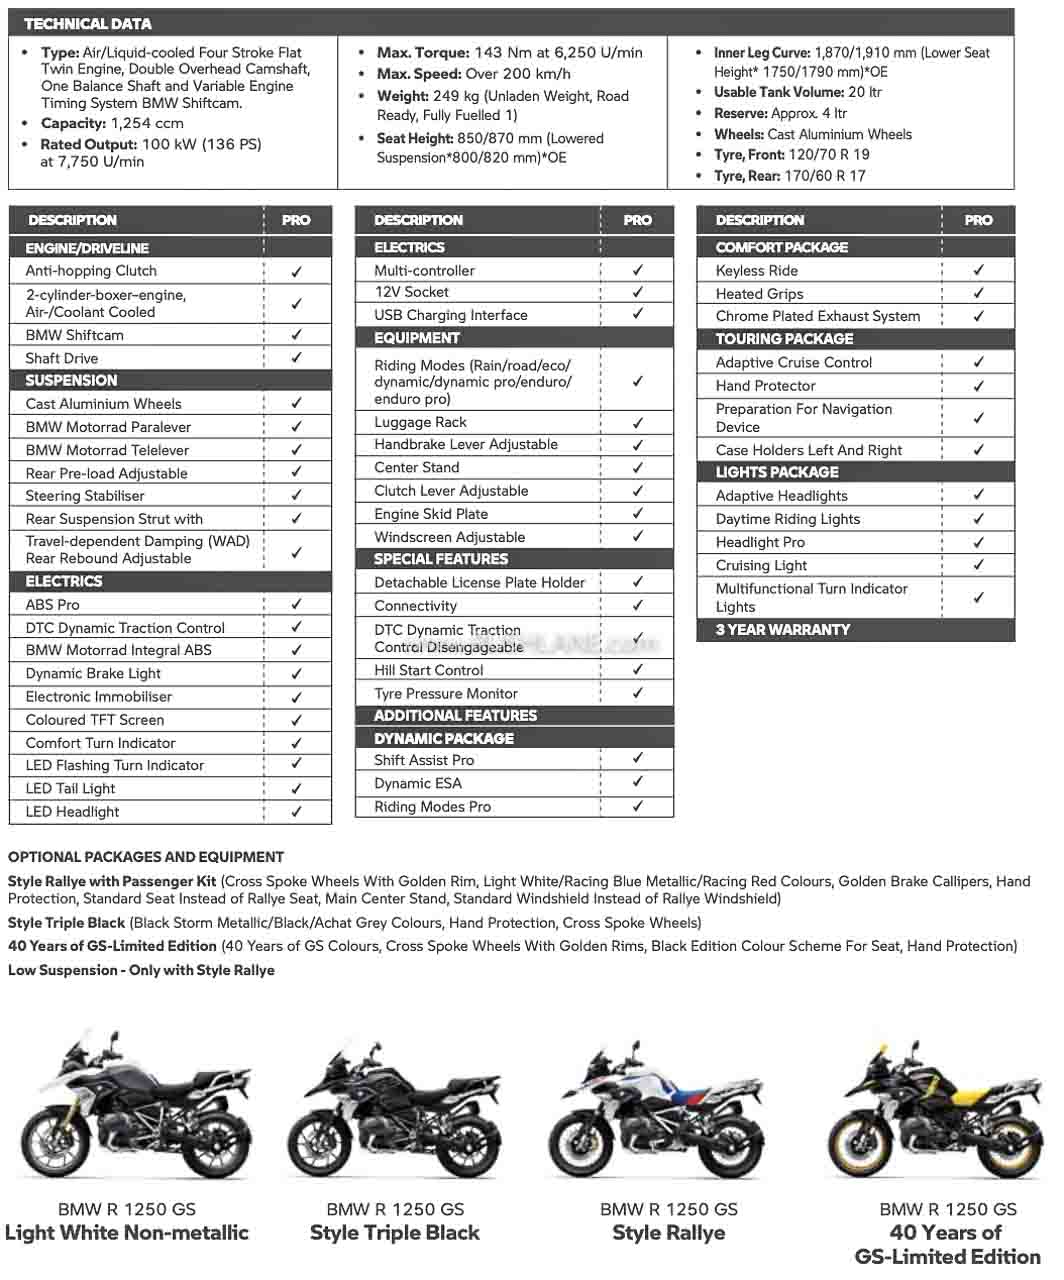 2021 BMW R 1250 GS Specs / Features